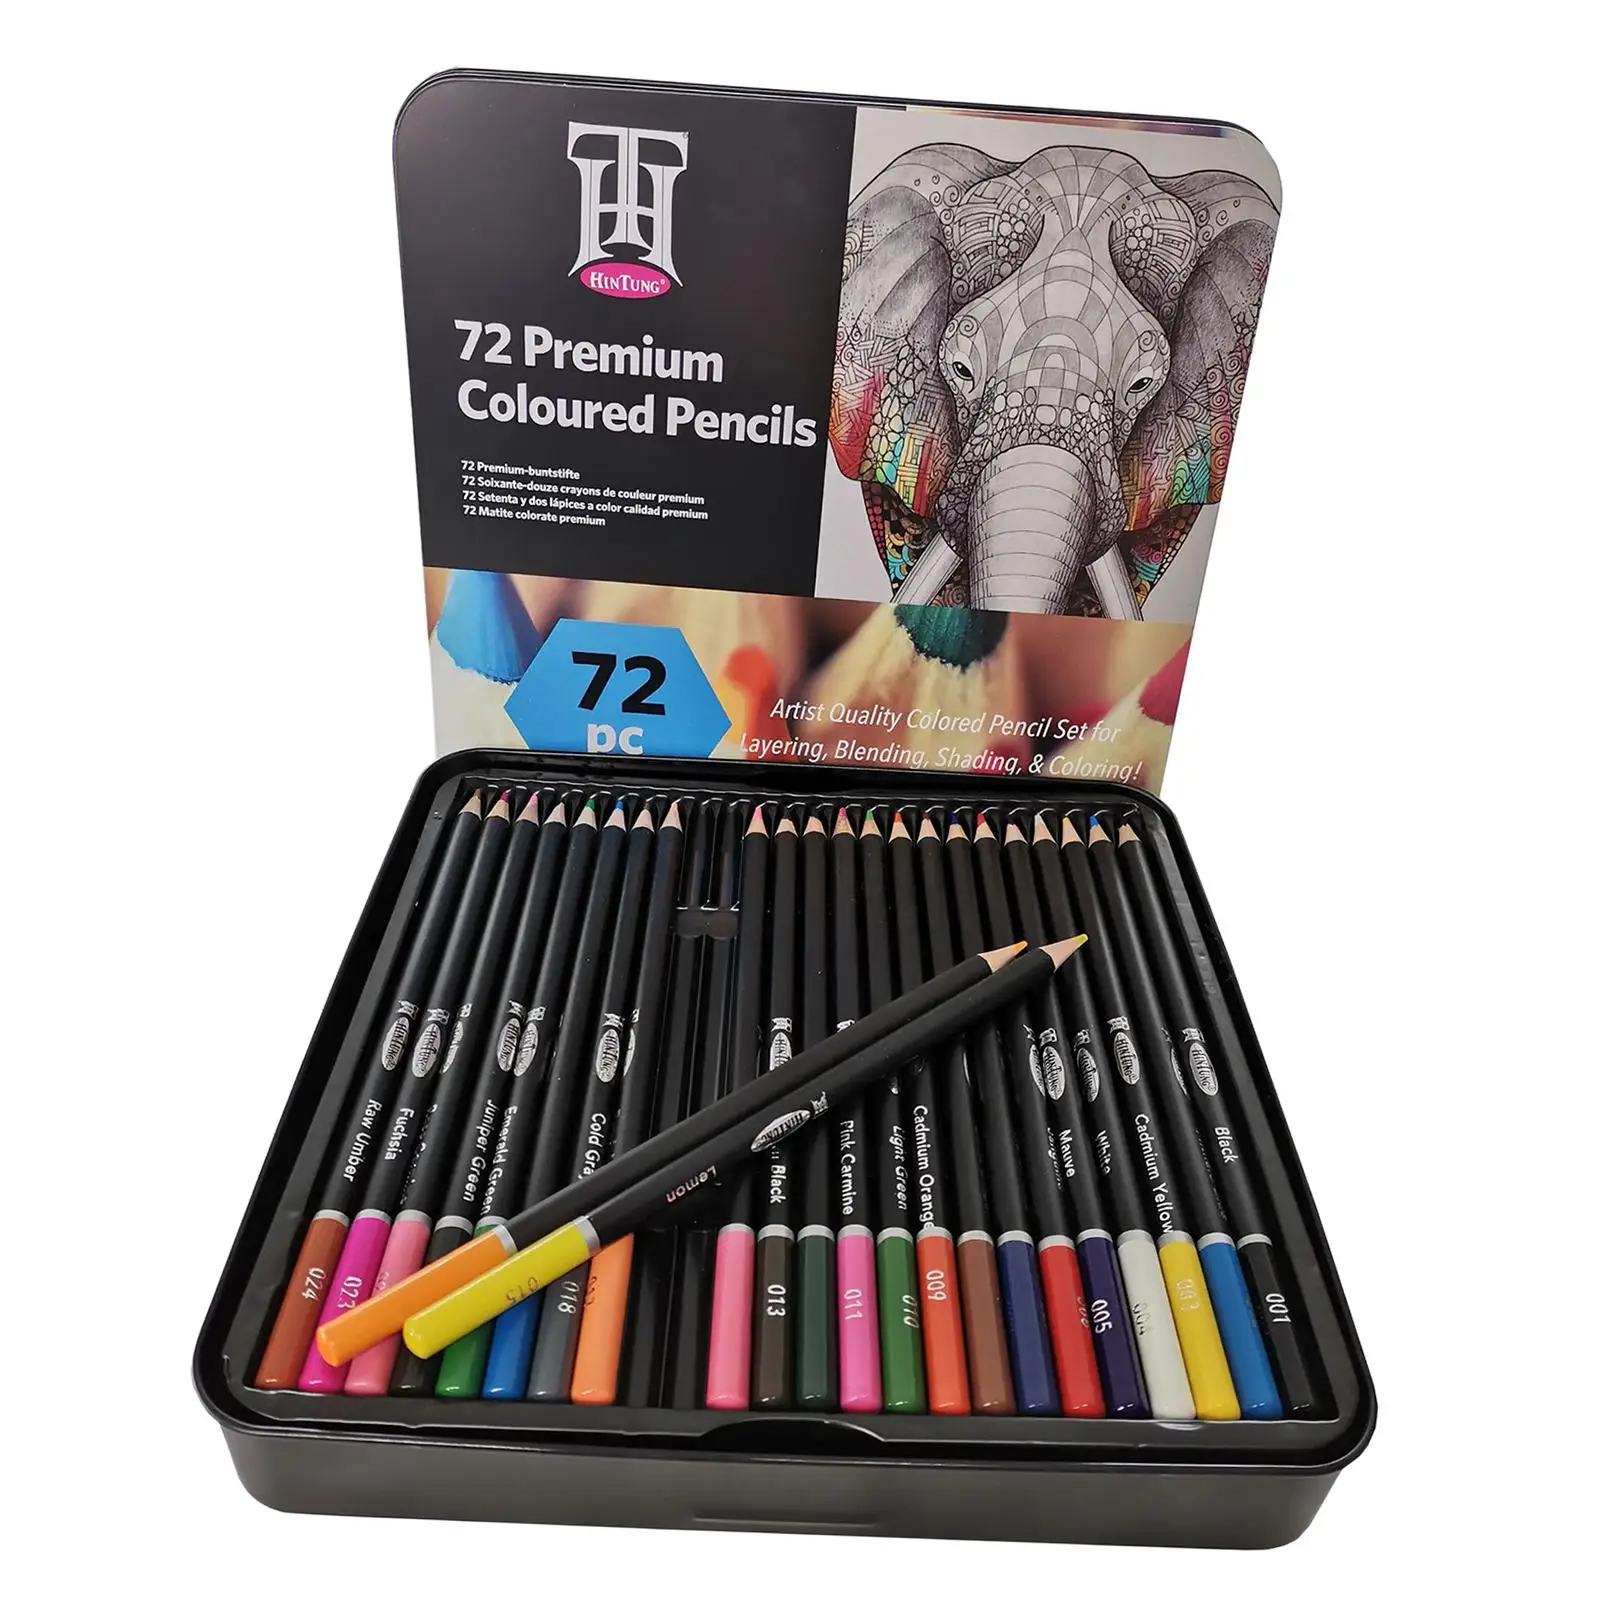 Colored Pencils with Storage Box, Assorted Colors, Professional Art Colouring Pencils for Kids Adults Artist Drawing Sketching